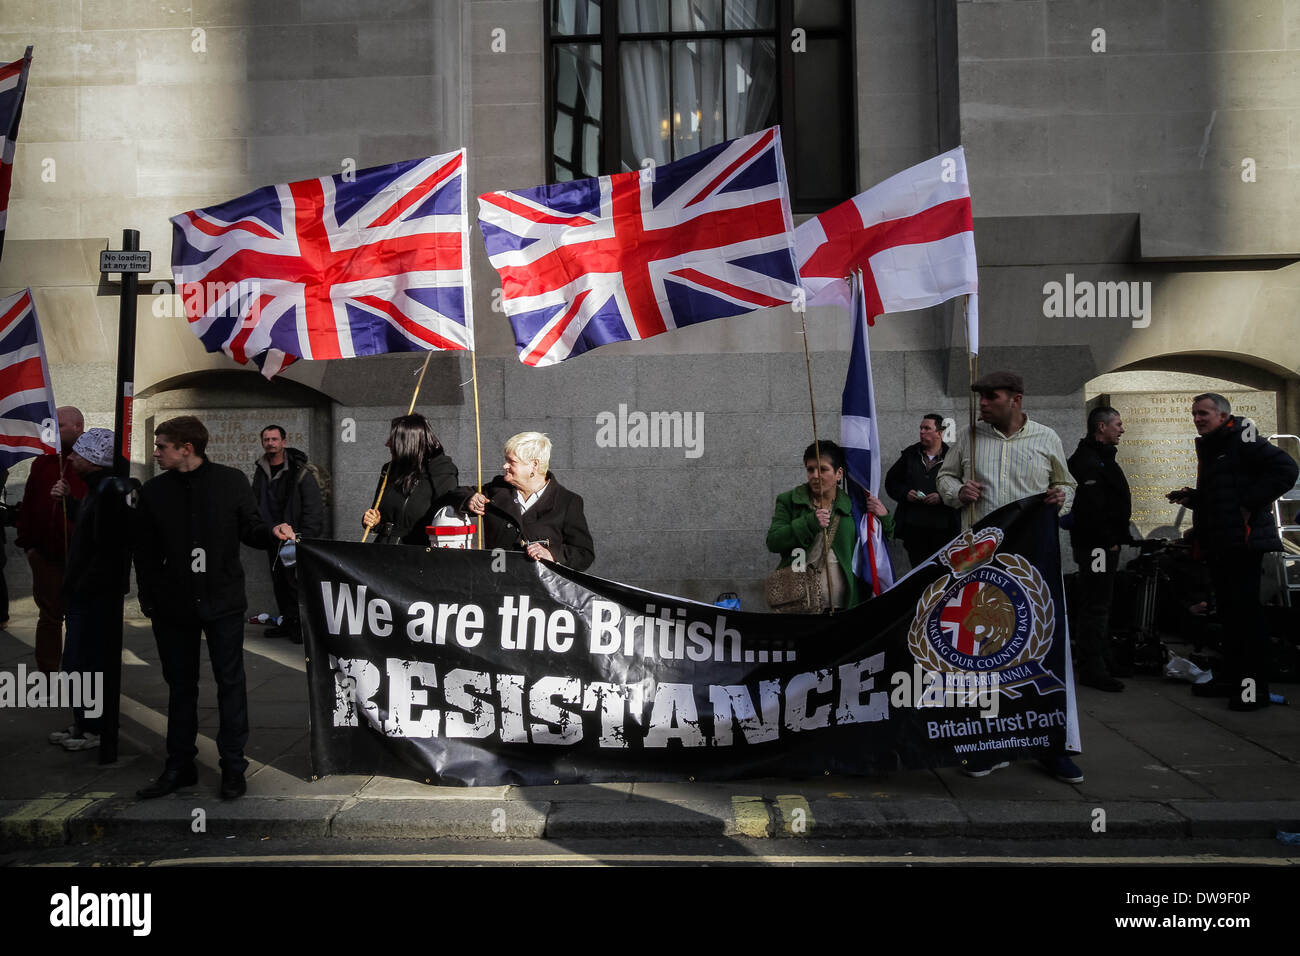 Members of Britain First right-wing patriot group demonstrate outside Old Bailey court in London. Stock Photo